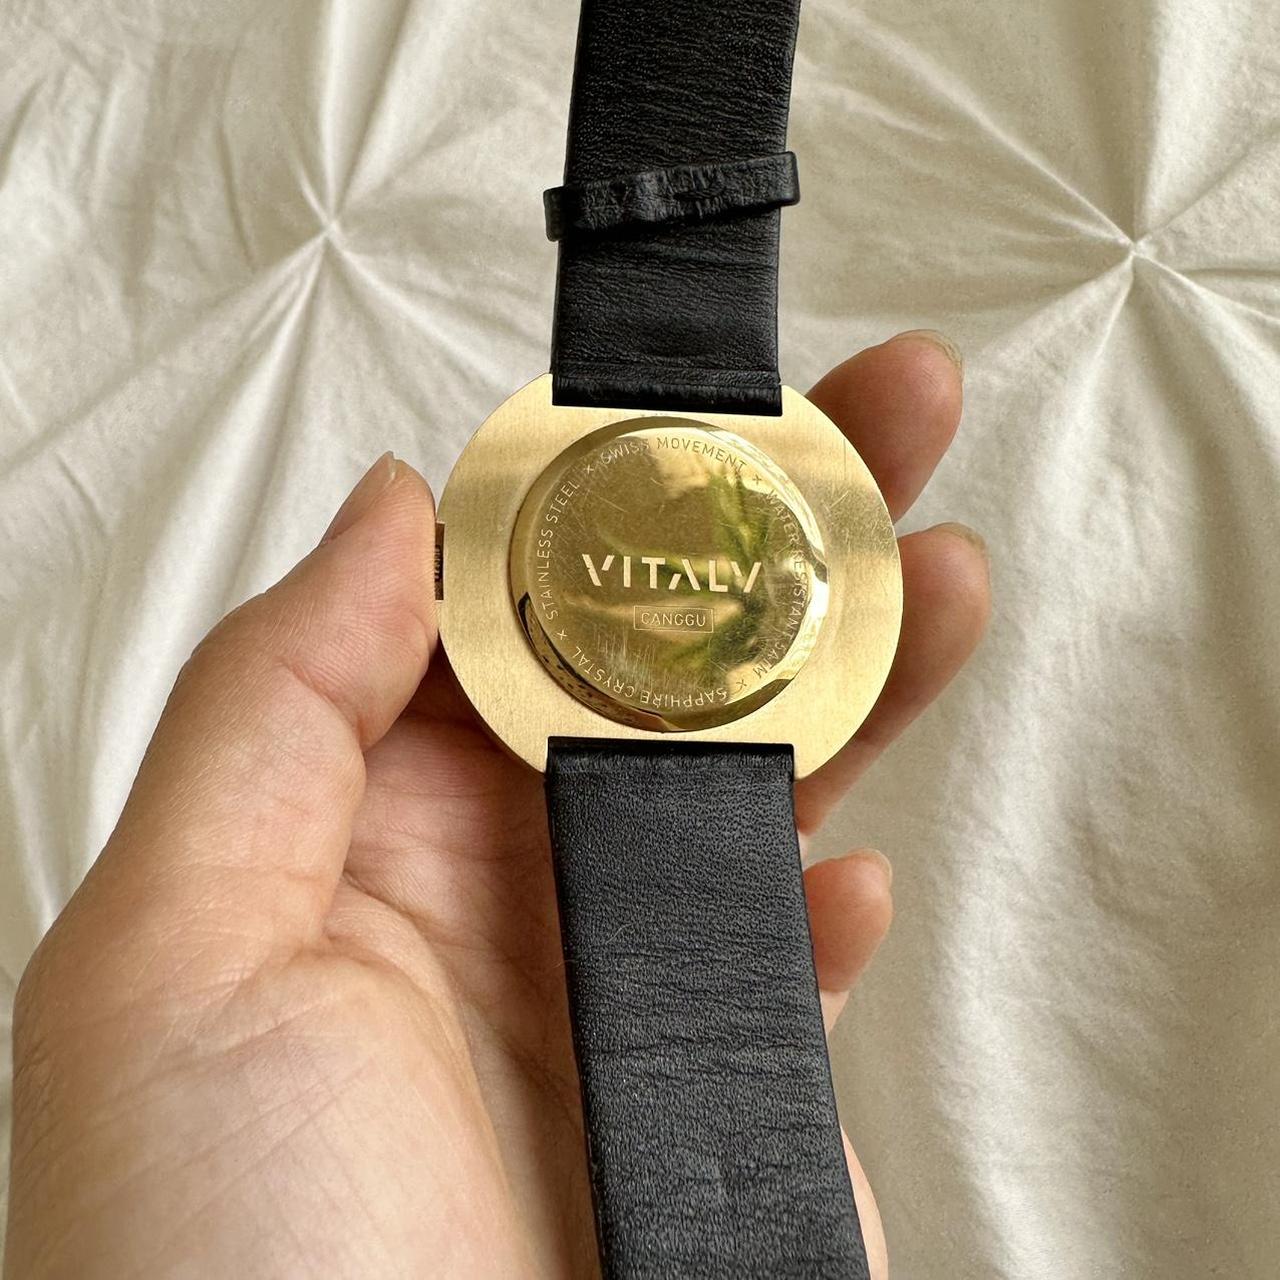 Vitaly Men's Black and Gold Watch (4)